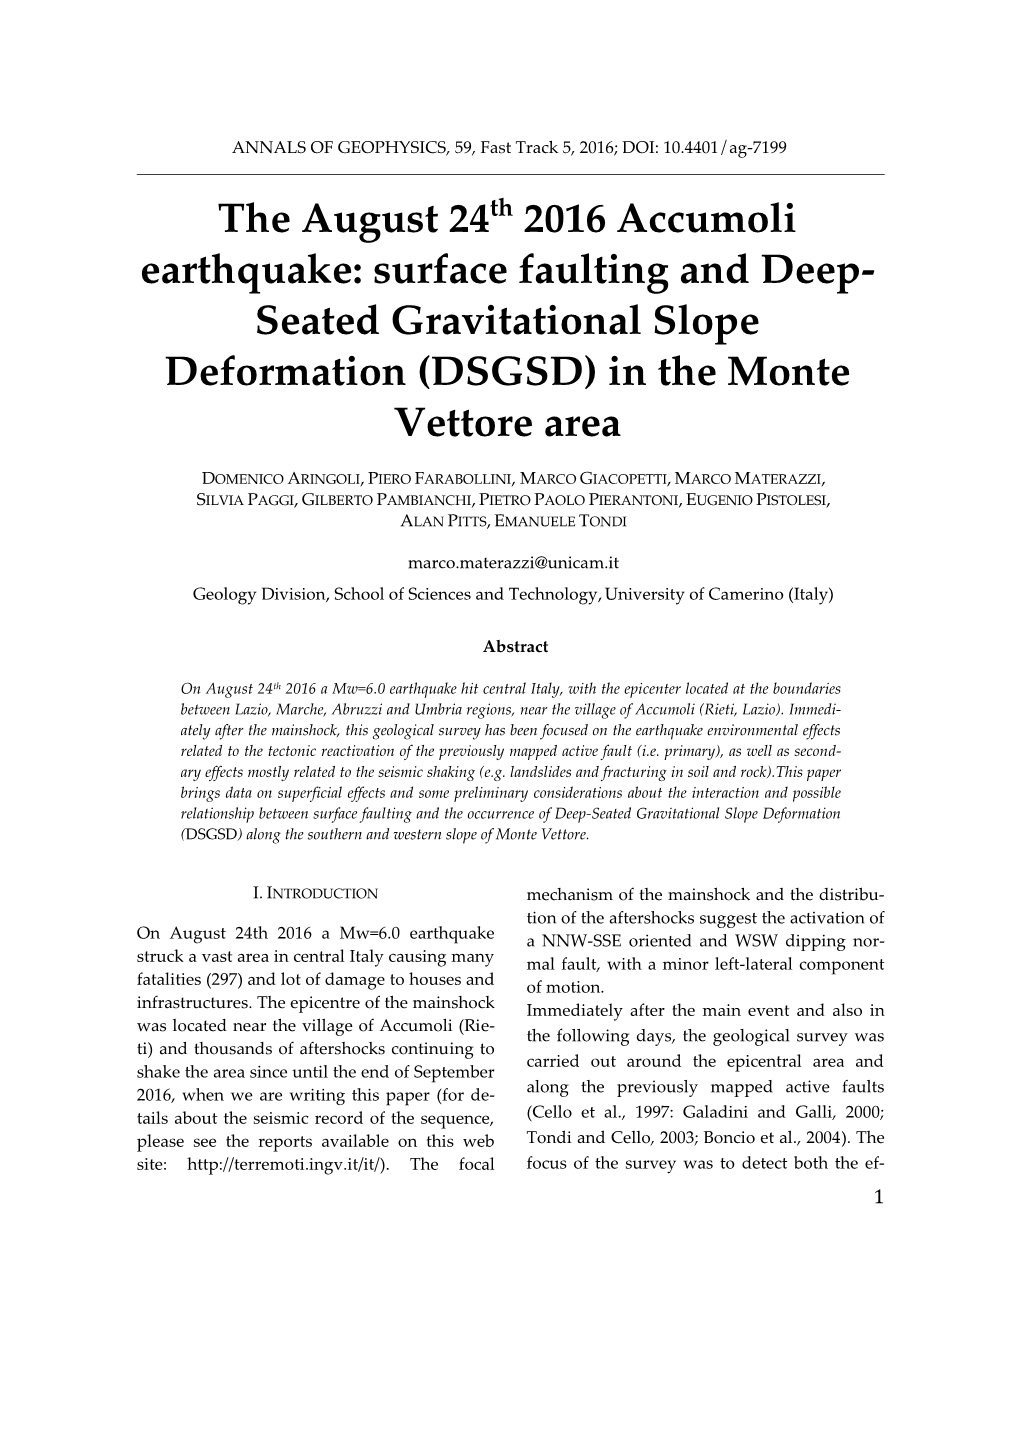 The August 24Th 2016 Accumoli Earthquake: Surface Faulting and Deep- Seated Gravitational Slope Deformation (DSGSD) in the Monte Vettore Area